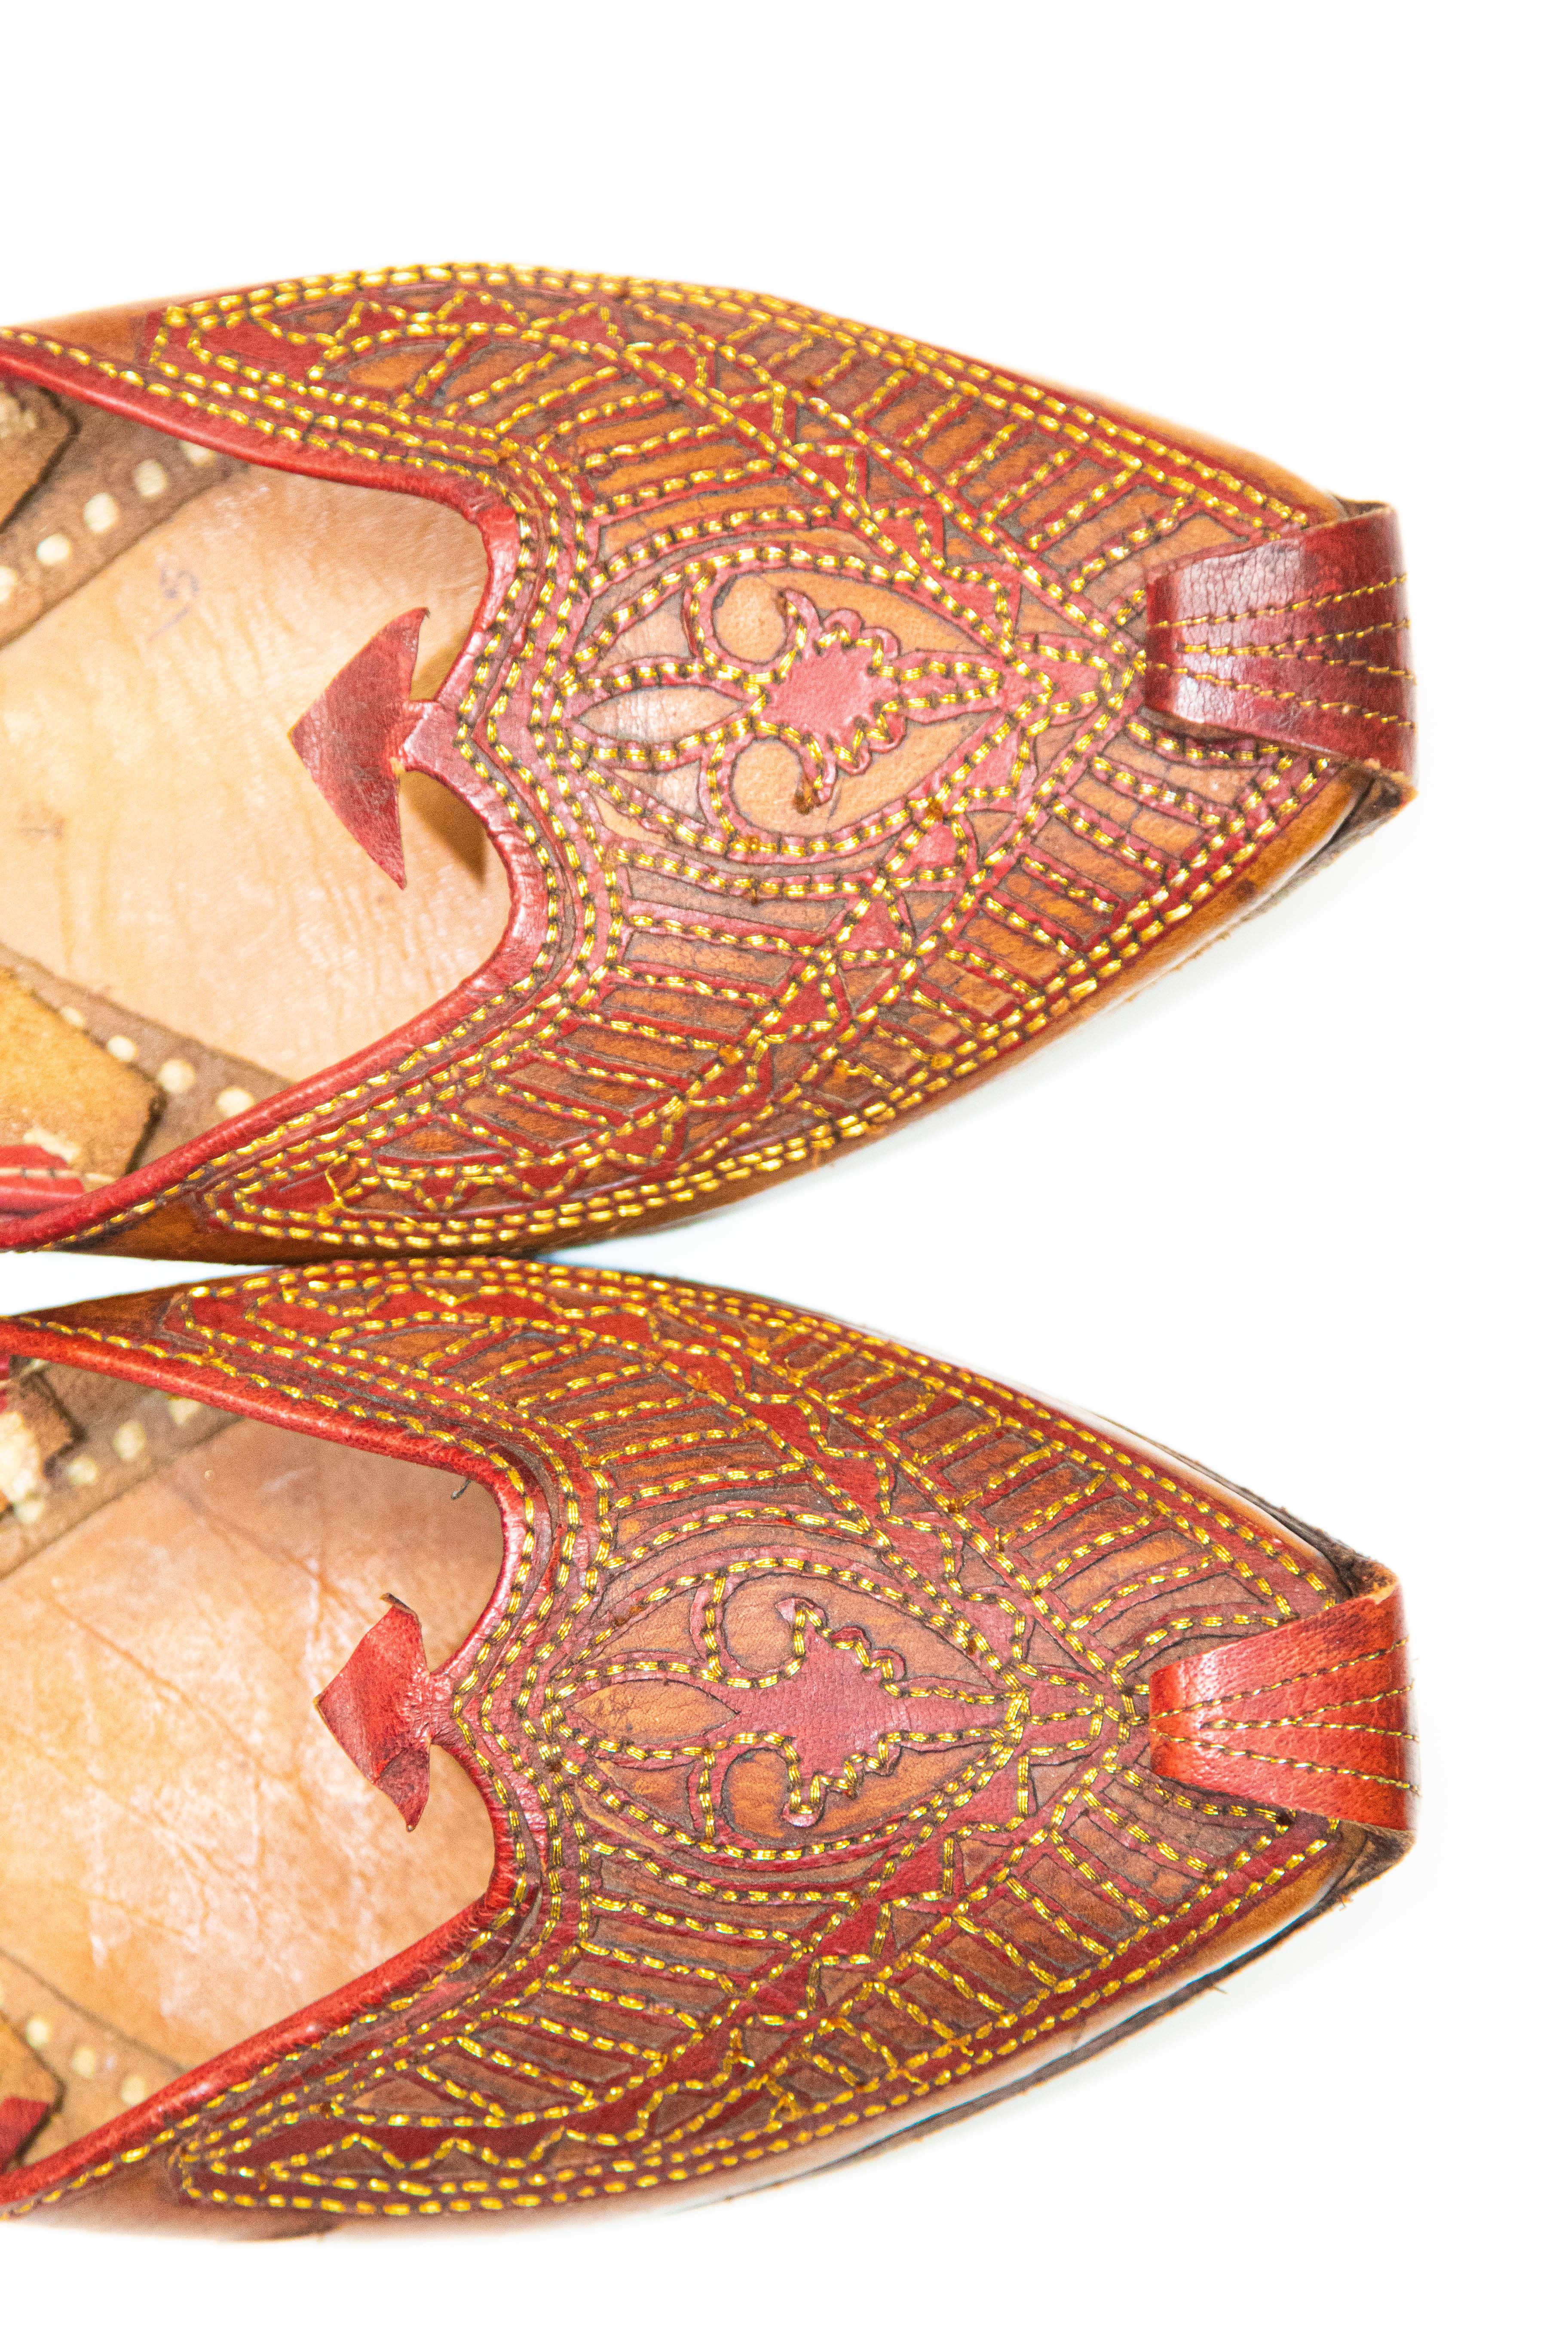 Vintage Arabian Mughal Leather Shoes with Gold Embroidered Curled Toe For Sale 6